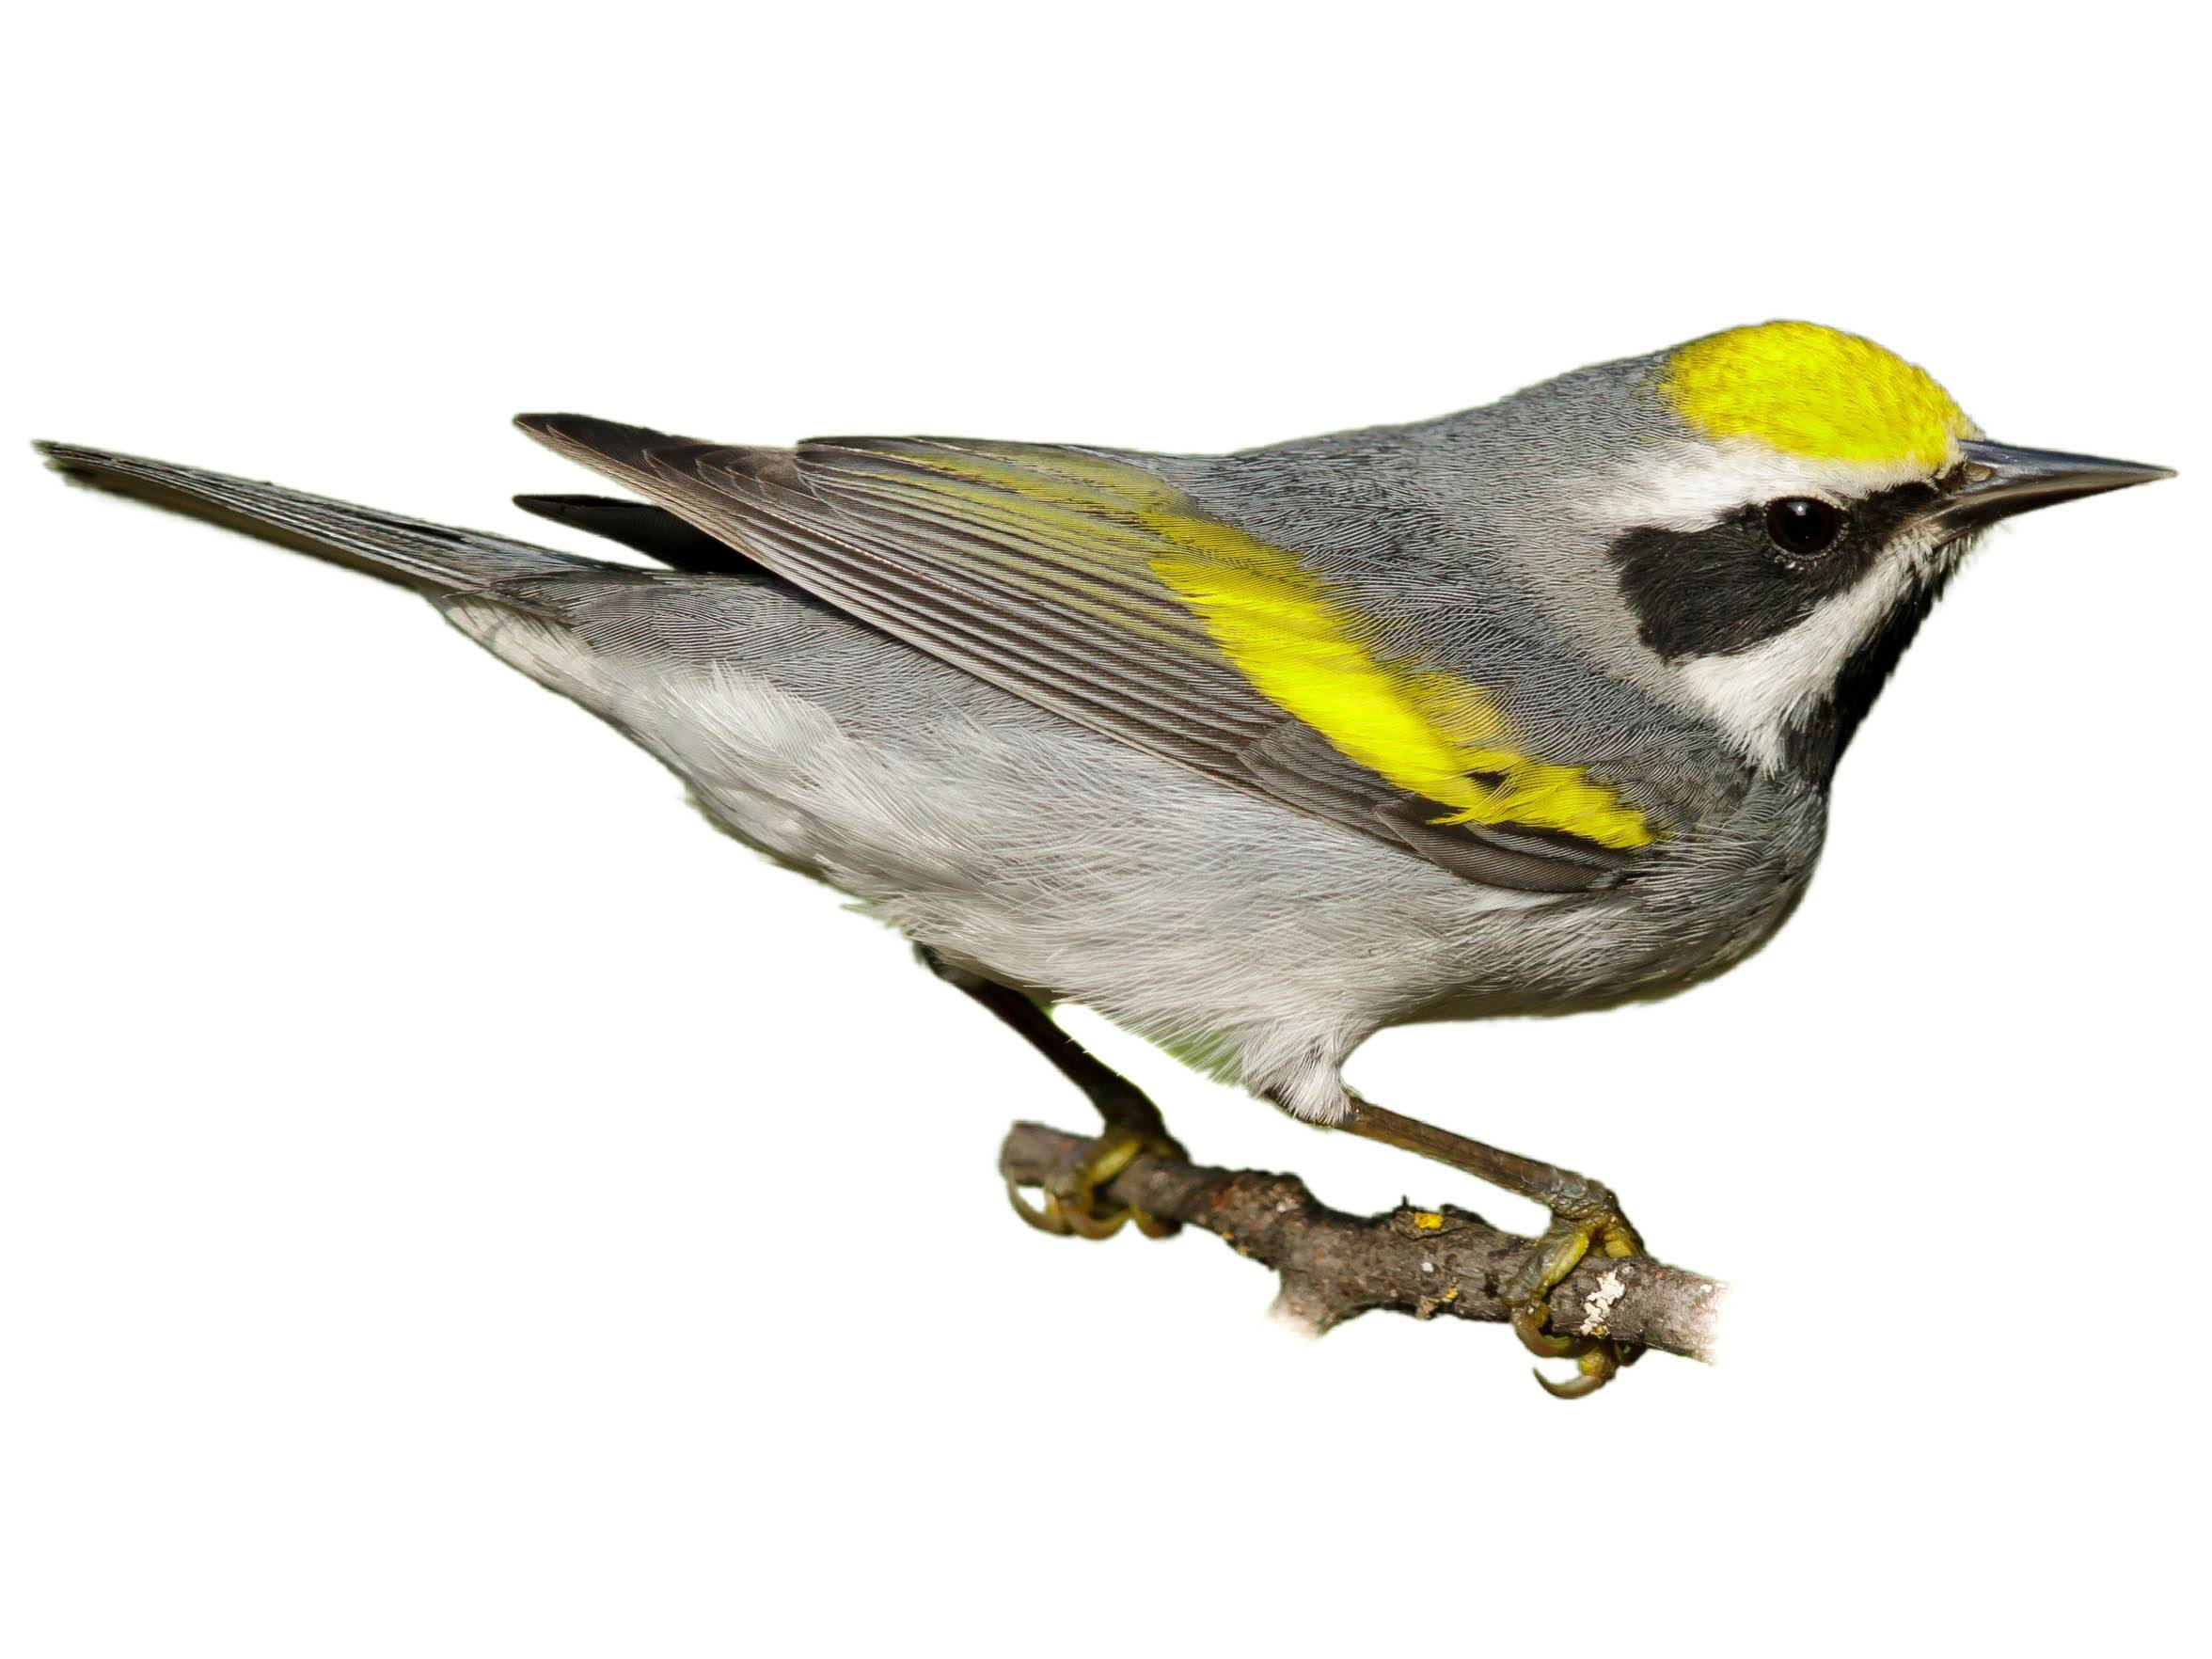 A photo of a Golden-winged Warbler (Vermivora chrysoptera), male